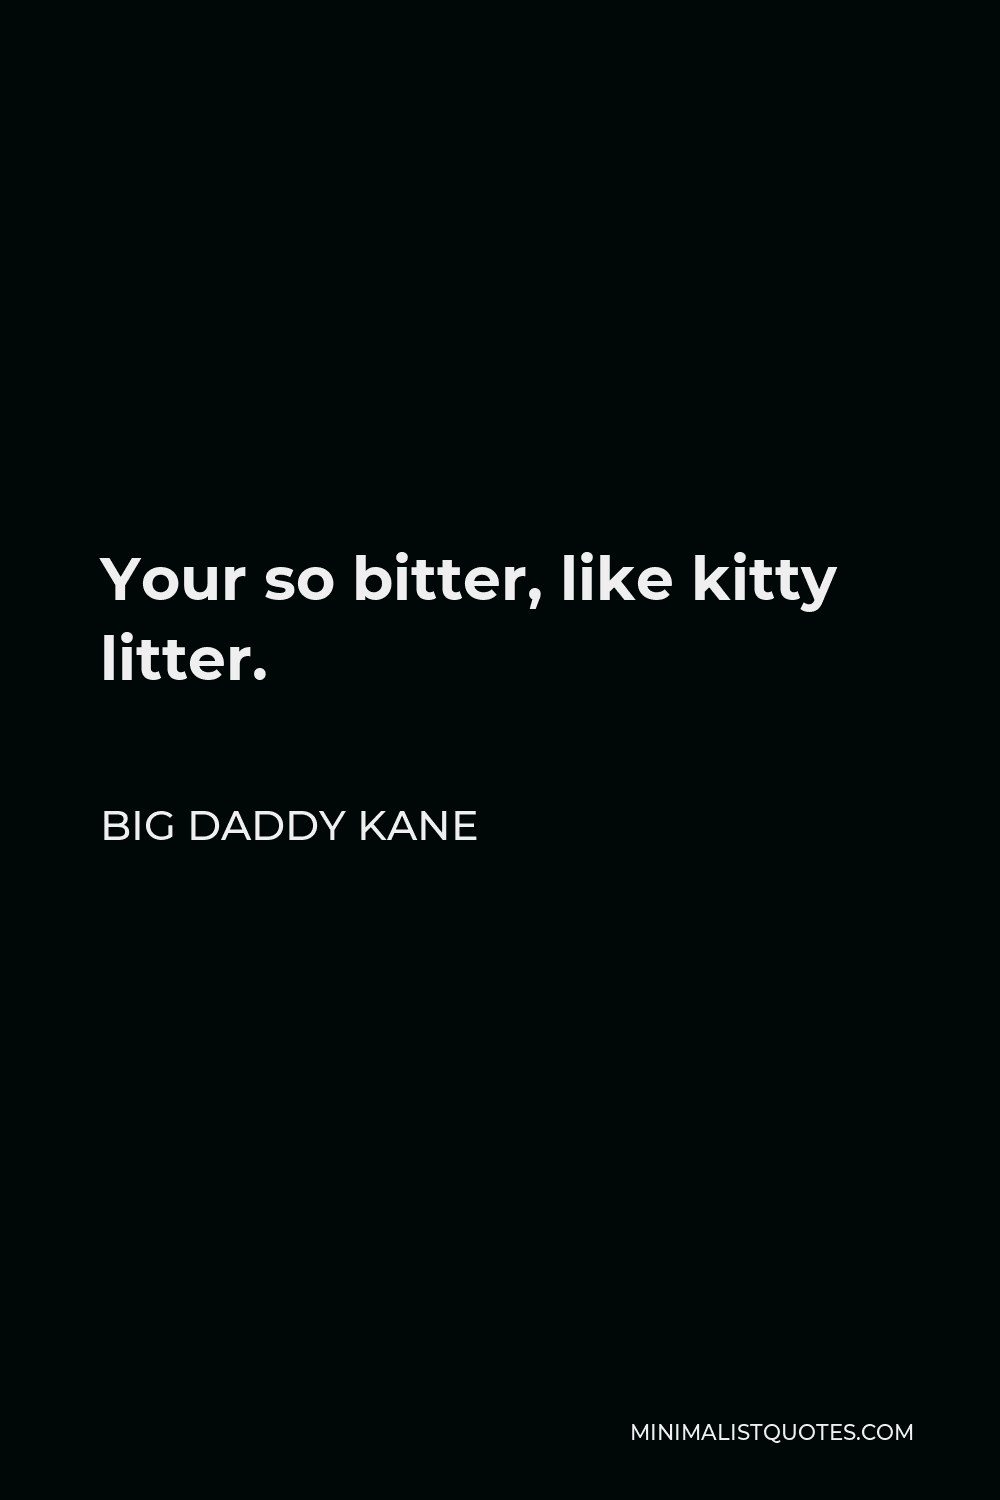 Big Daddy Kane Quote - Your so bitter, like kitty litter.